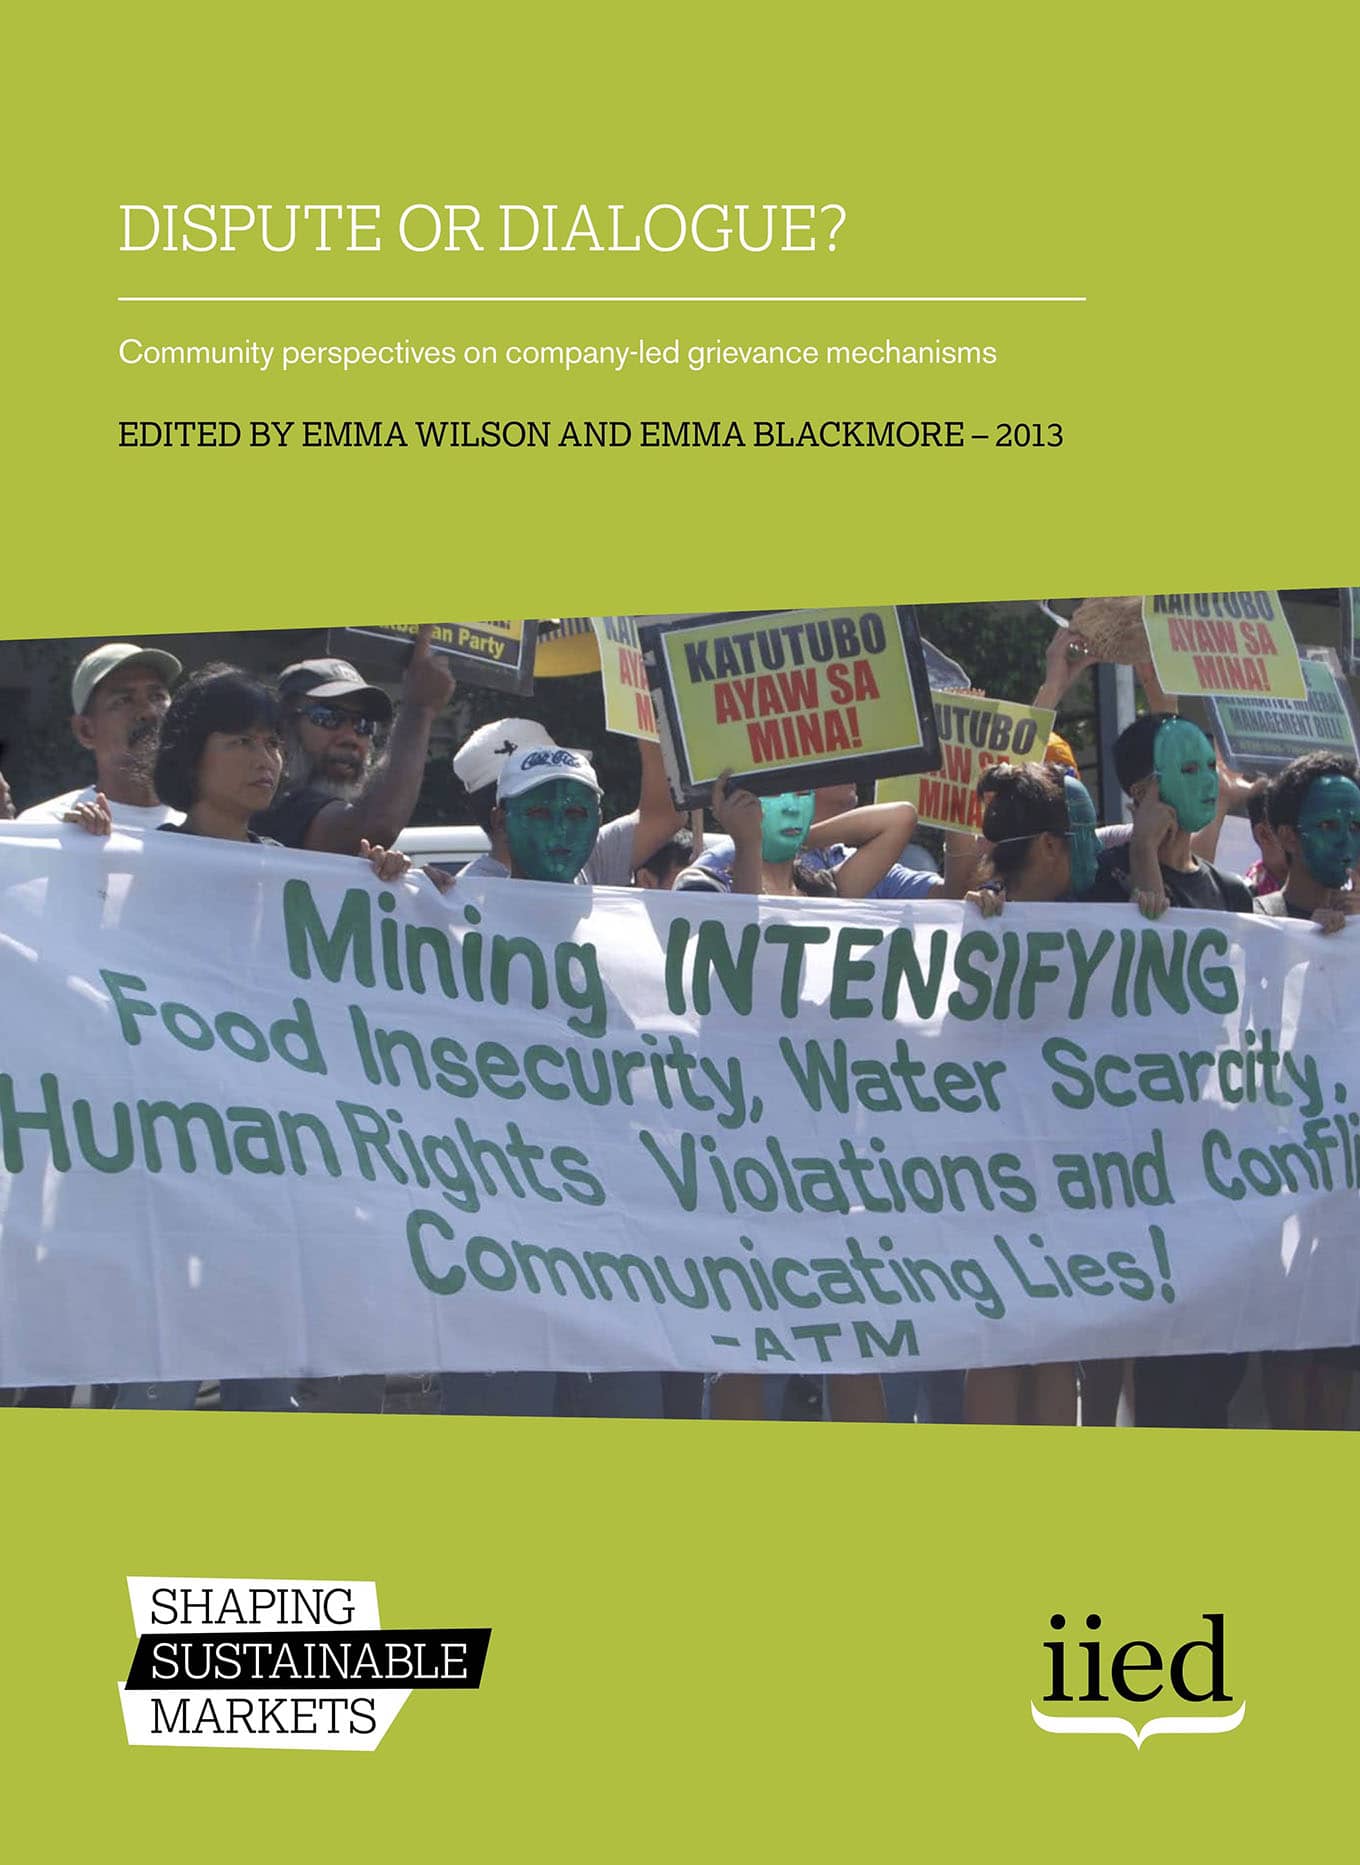 Dispute or Dialogue? Community perspectives on company-led grievance mechanisms (IIED, 2013)